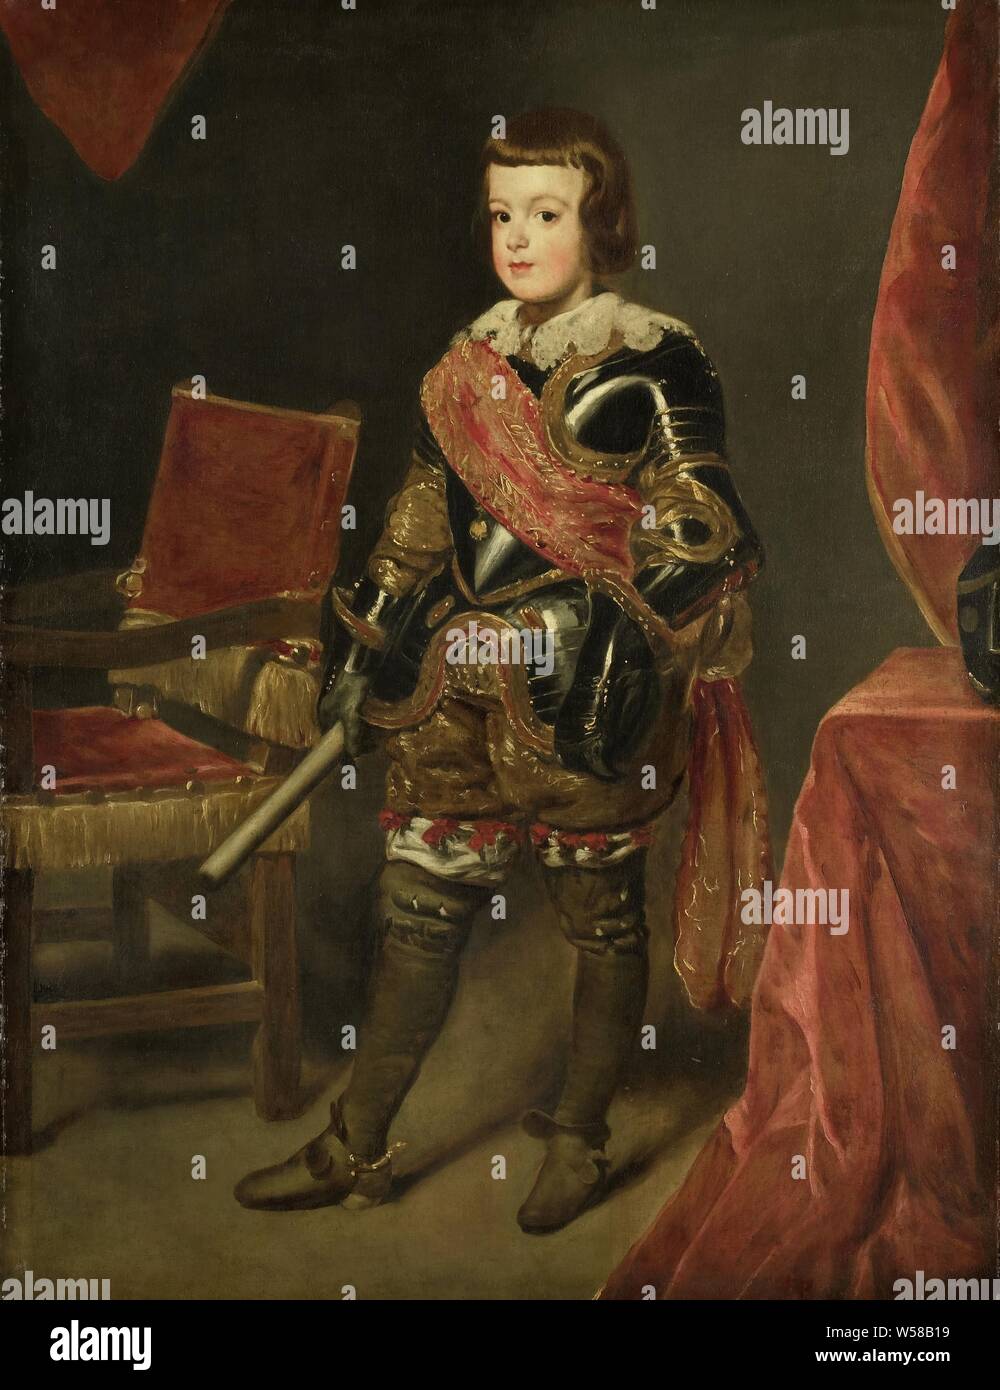 Portrait of Prince Baltasar Carlos, Son of the Spanish King Philip IV, at approximately 11 years of age, Portrait of Prince Balthasar Carlos, son of the Spanish king Philips IV, at about the age of eleven. Standing, full-length in armor, commado staff in the right hand, to the right of a chair., Juan Bautista Martínez del Mazo (attributed to), 1639 - 1645, canvas, oil paint (paint), h 148.8 cm × w 113.2 cm × t 4.6 cm d 7.4 cm Stock Photo